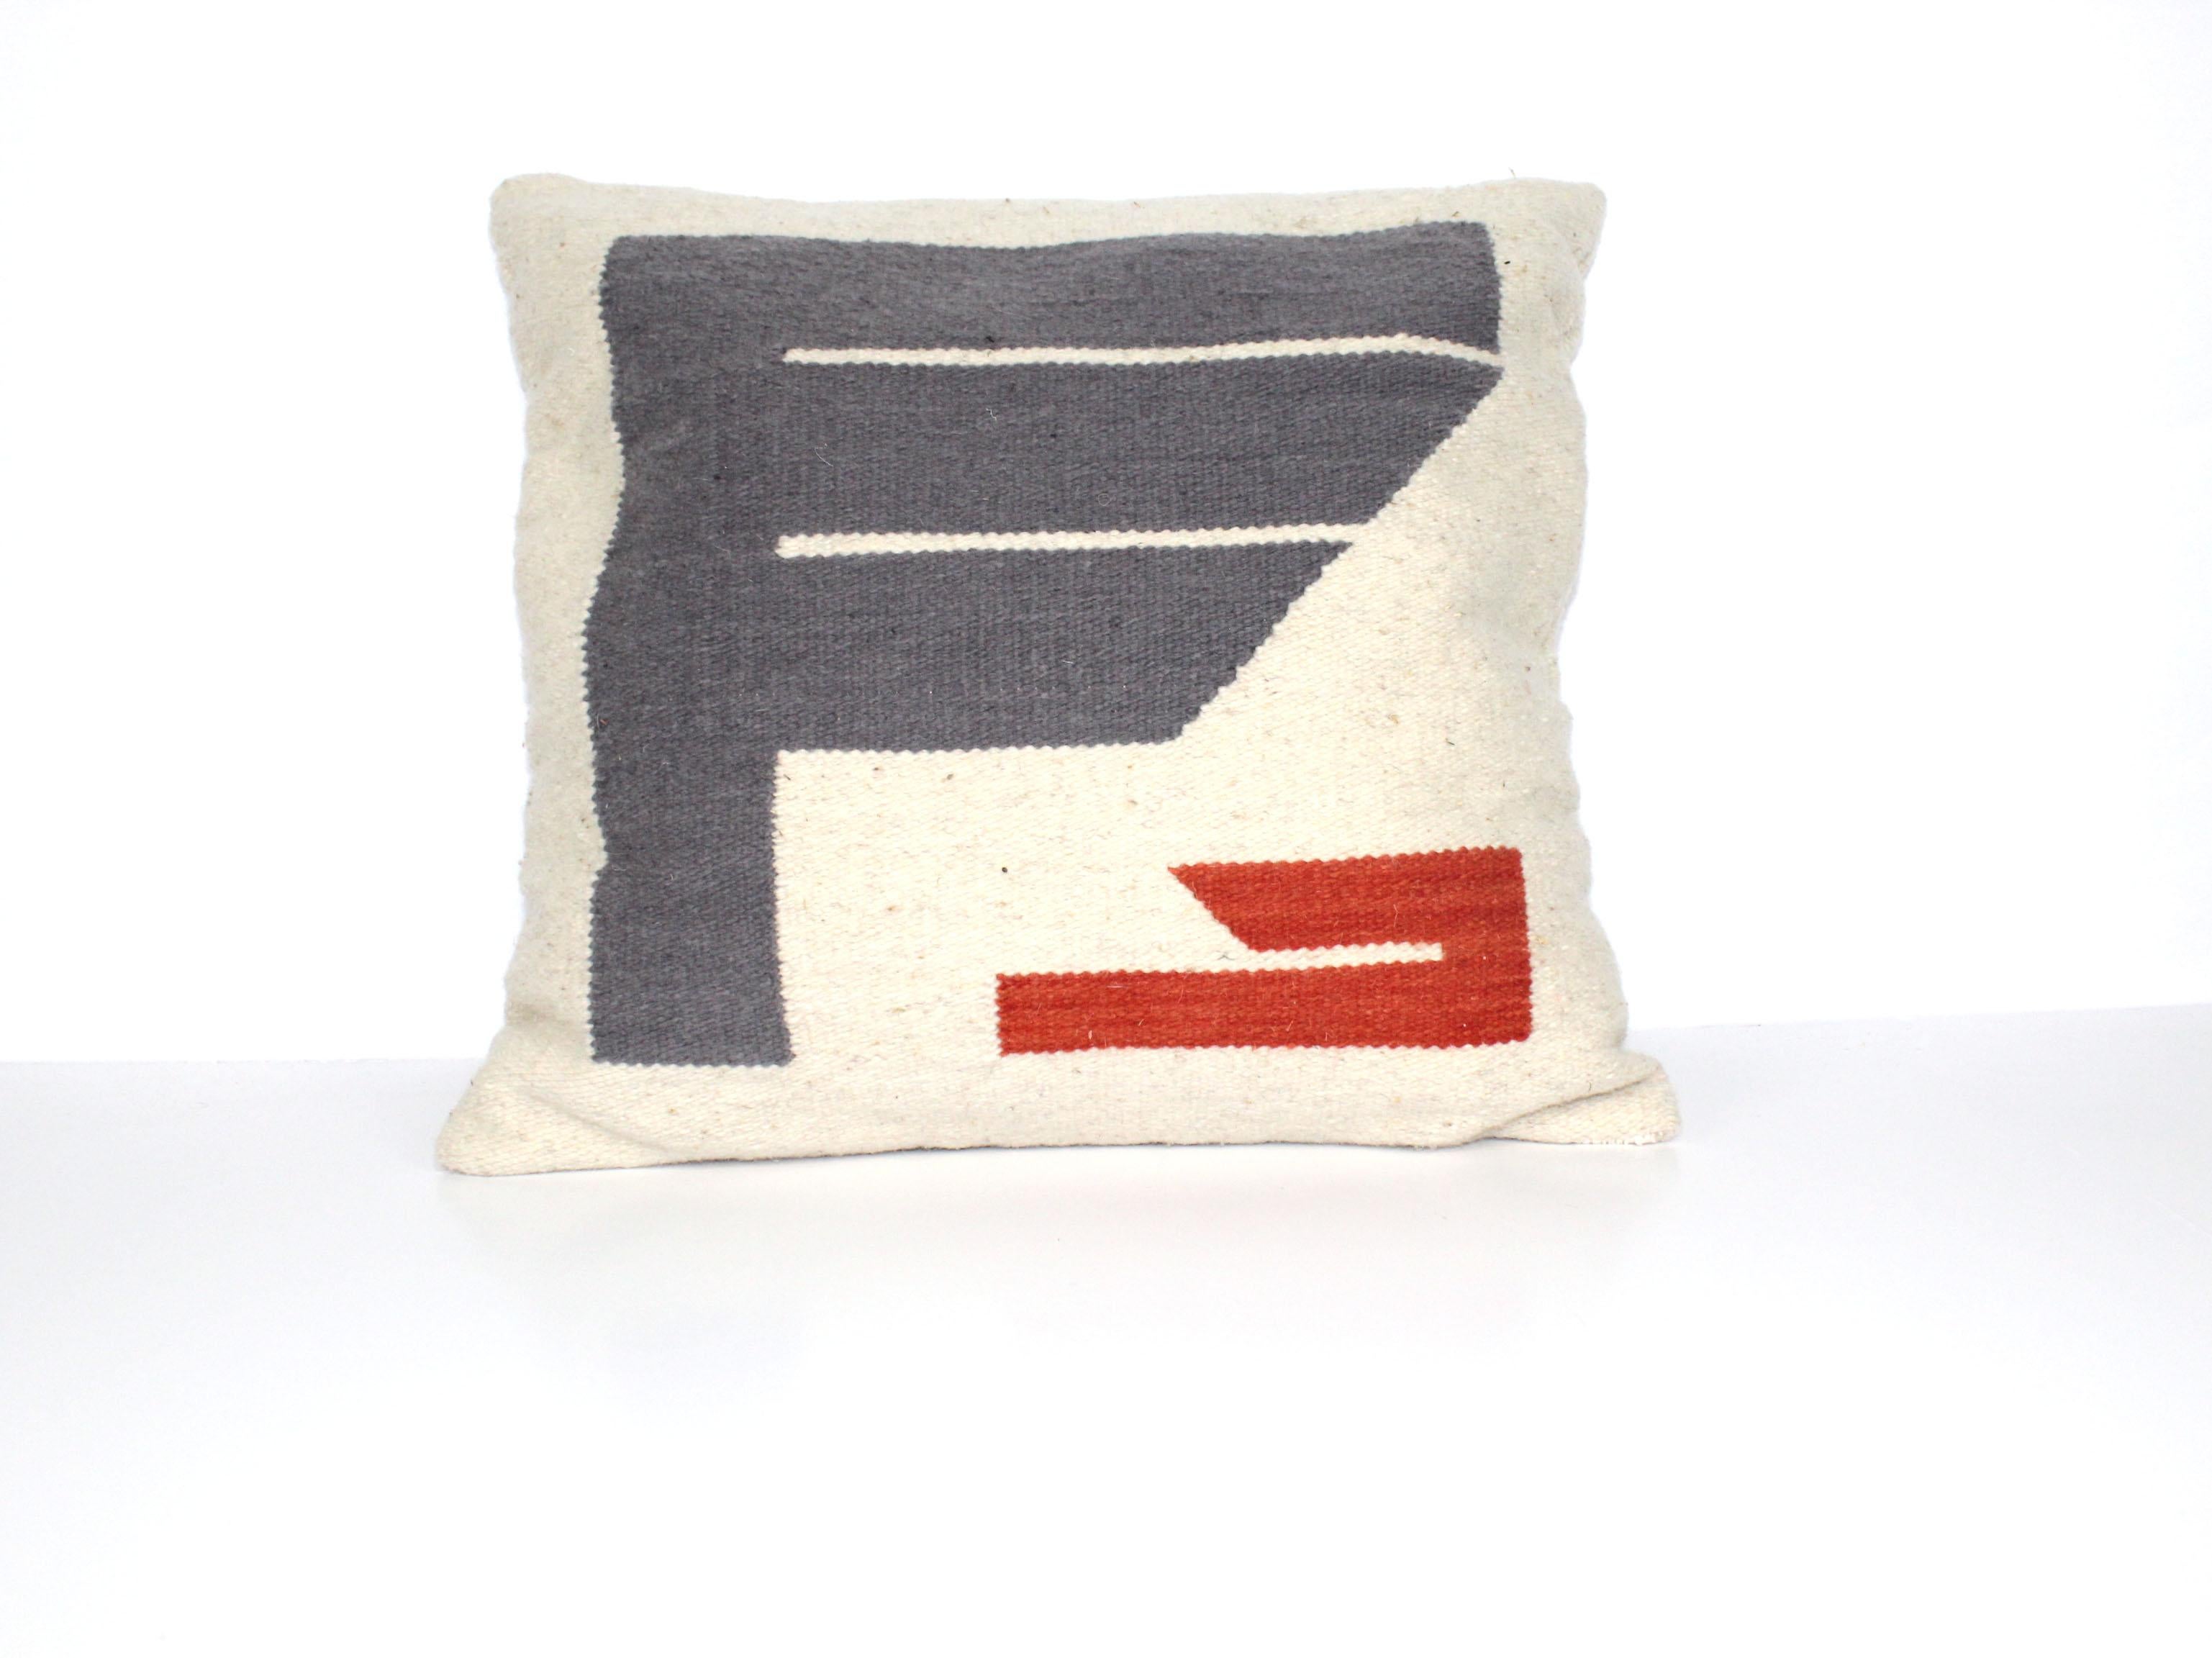 Hand-Woven Bespoke set of Handwoven Throw Pillows For Sale